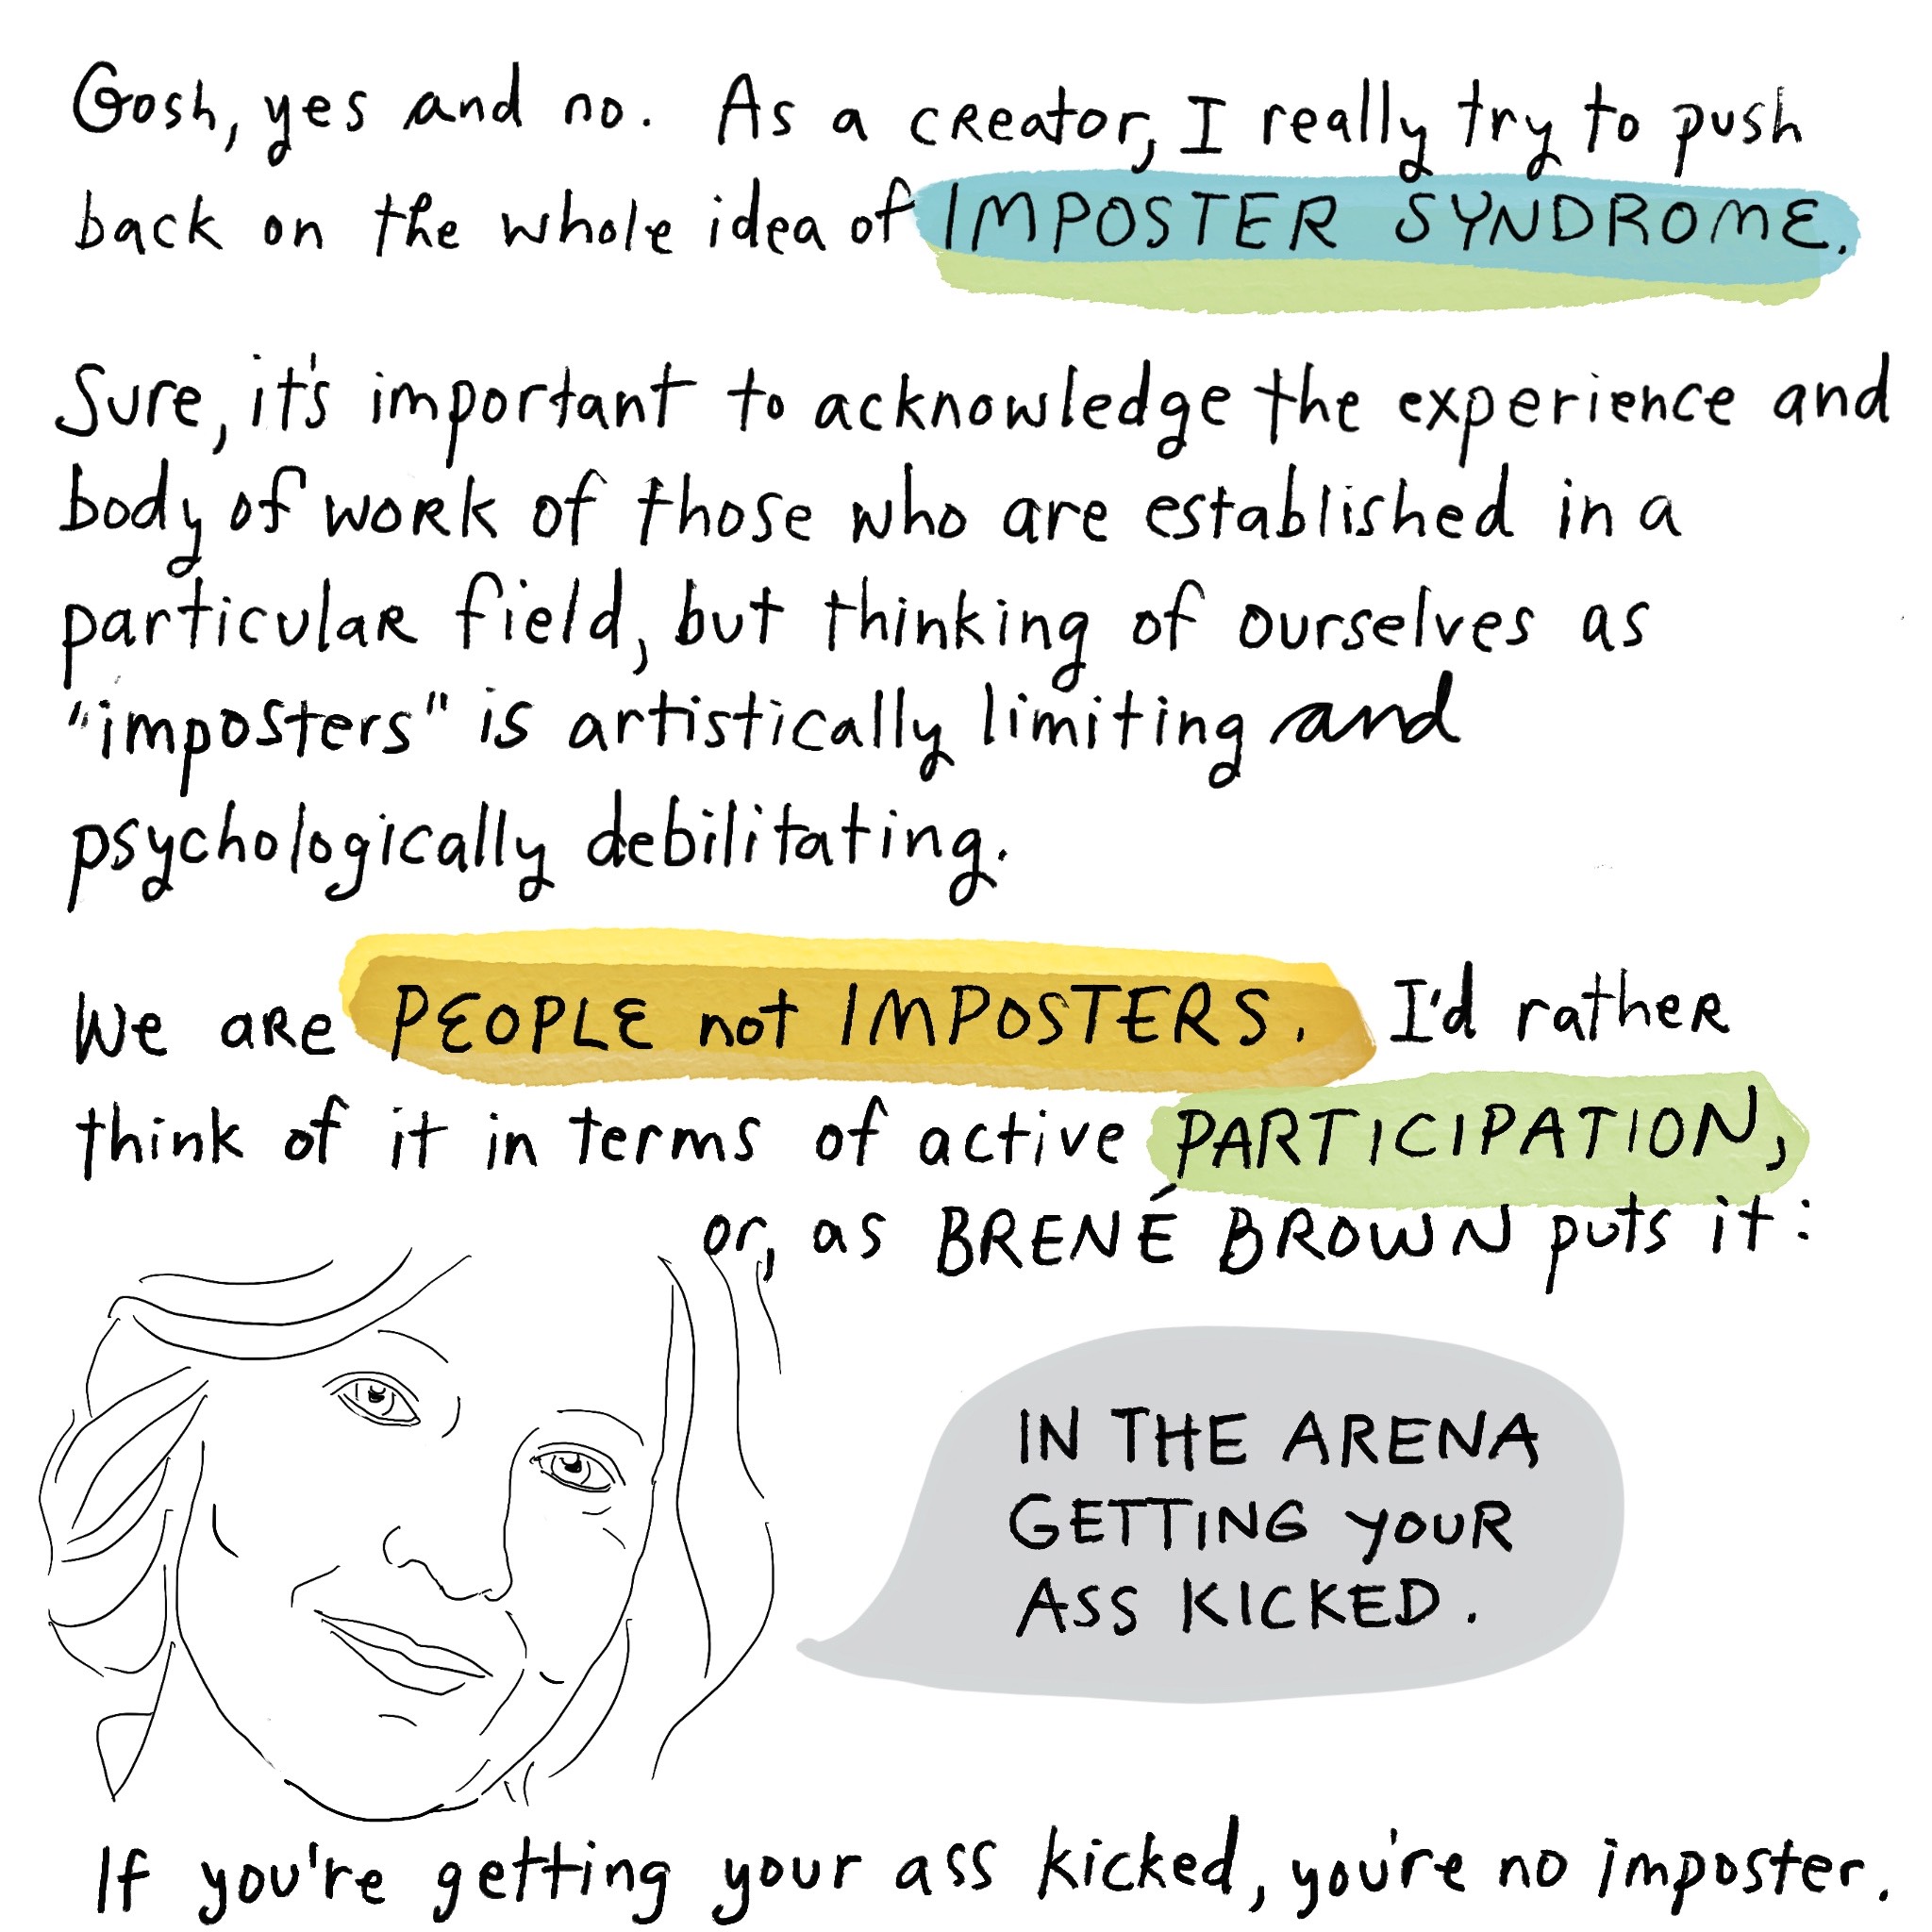 Image is a sketch of a woman's pleasant face with a speech bubble that says, IN THE ARENA GETTING YOUR ASS KICKED. Accompanying text: "Gosh, yes and no. As a creator, I really try to push back on the whole idea of IMPOSTER SYNDROME. Sure, it’s important to acknowledge the experience and body of work of those who are established in a particular field, but thinking of ourselves as “imposters” is artistically limiting and psychologically debilitating. We are PEOPLE not IMPOSTERS. I’d rather think of it in terms of active PARTICIPATION, or, as BRENÈ BROWN puts it: If you’re getting your ass kicked, you’re no imposter." The words IMPOSTER SYNDROME, PEOPLE not IMPOSTERS, and PARTICIPATION are highlighted in the text. Image is hyperlinked to DARING GREATLY.